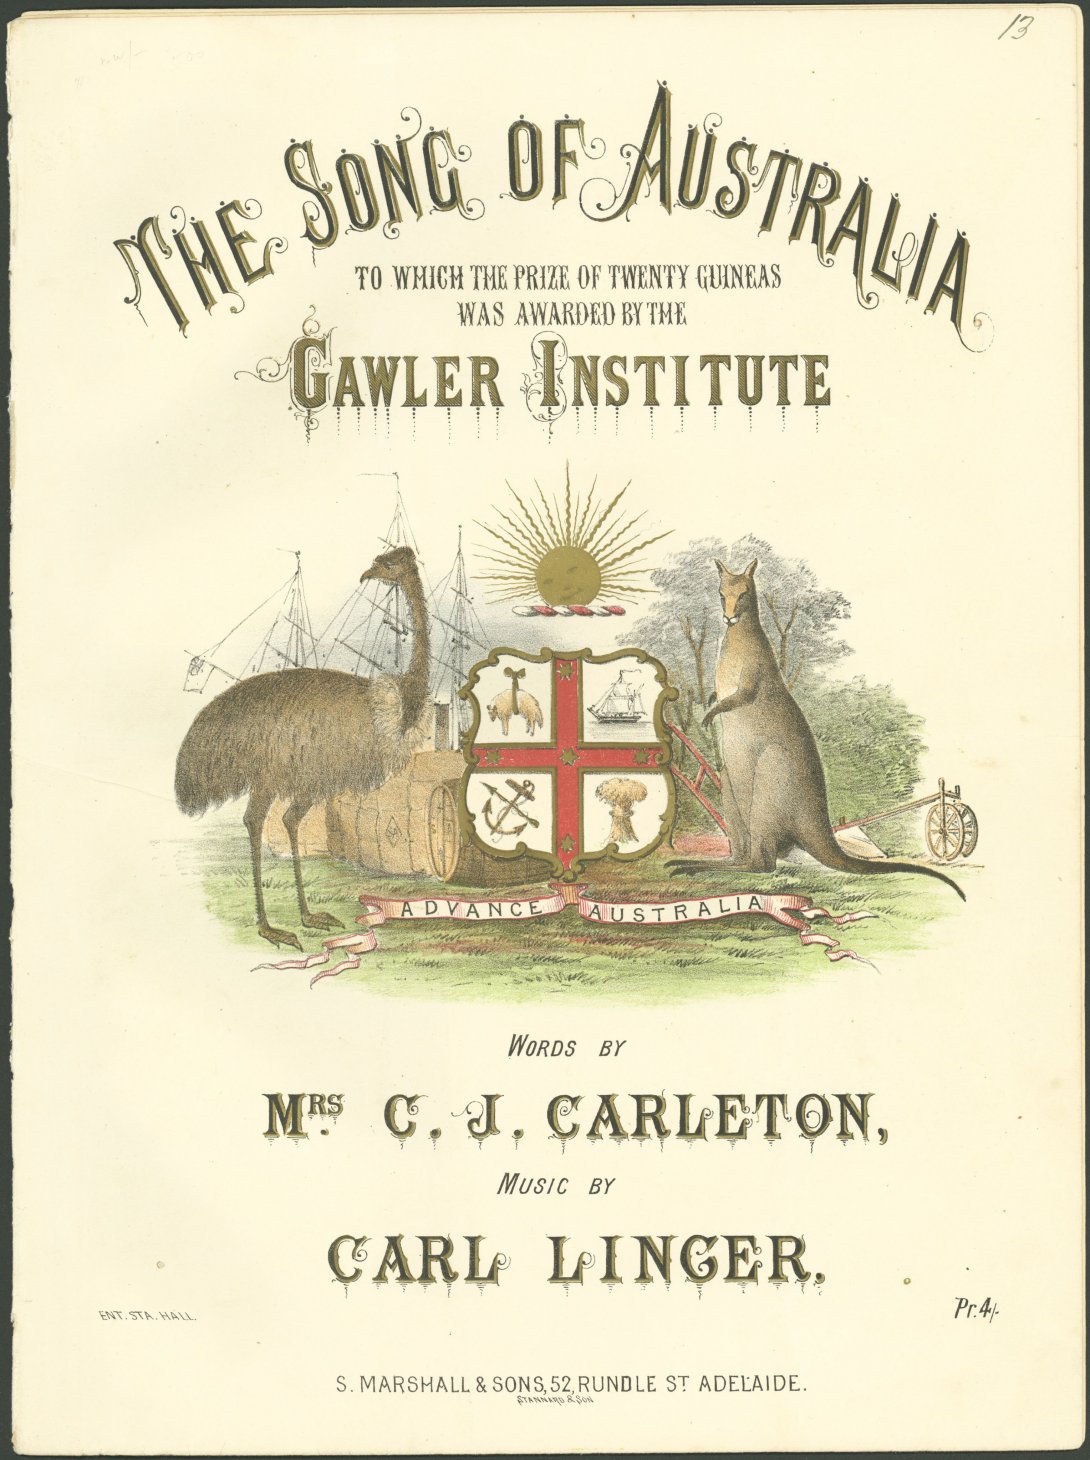 Cover of sheet music. Features an arced title 'The Song of Australia' at the top, with a picture in the middle of a shield with a rising sun above it, an emu at left and a kangaroo at right.